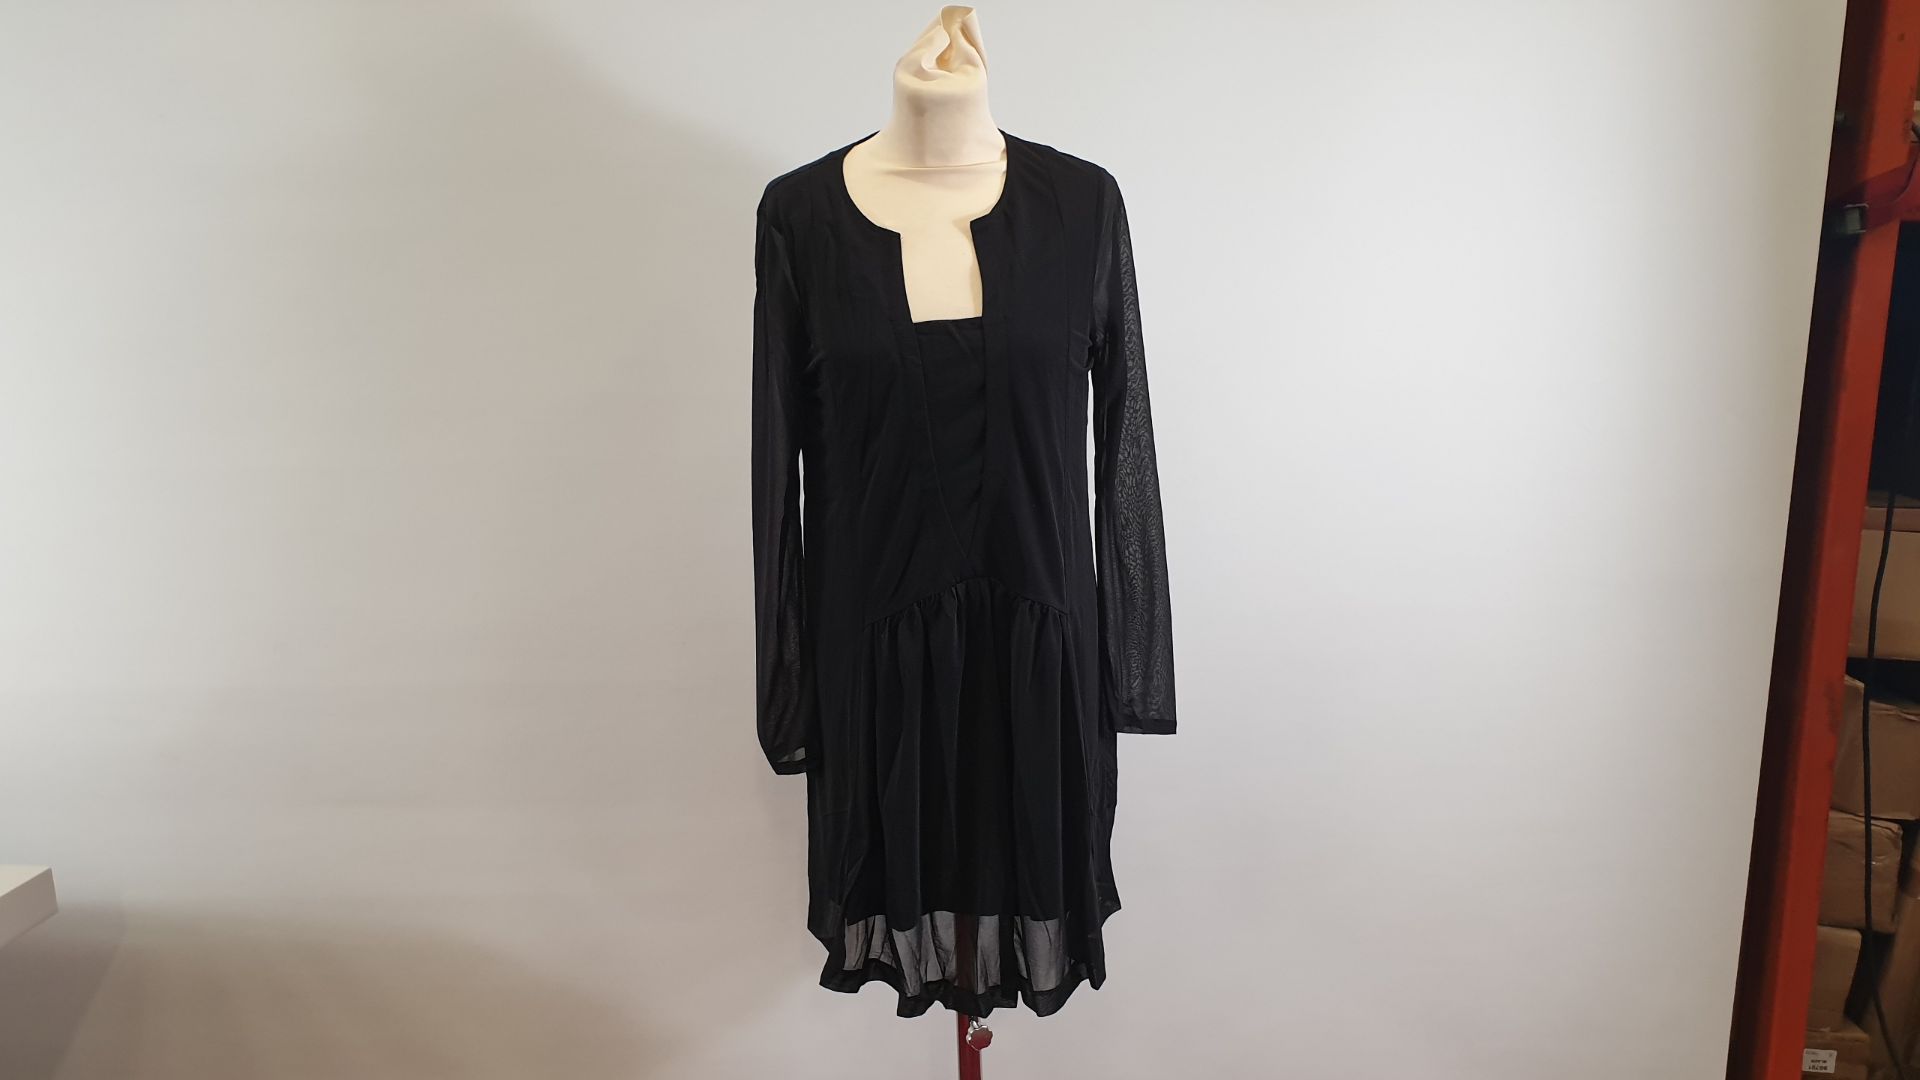 30 X MANGO CASUAL WEAR BLACK DRESSES (REF:41060413) IN VARIOUS SIZES